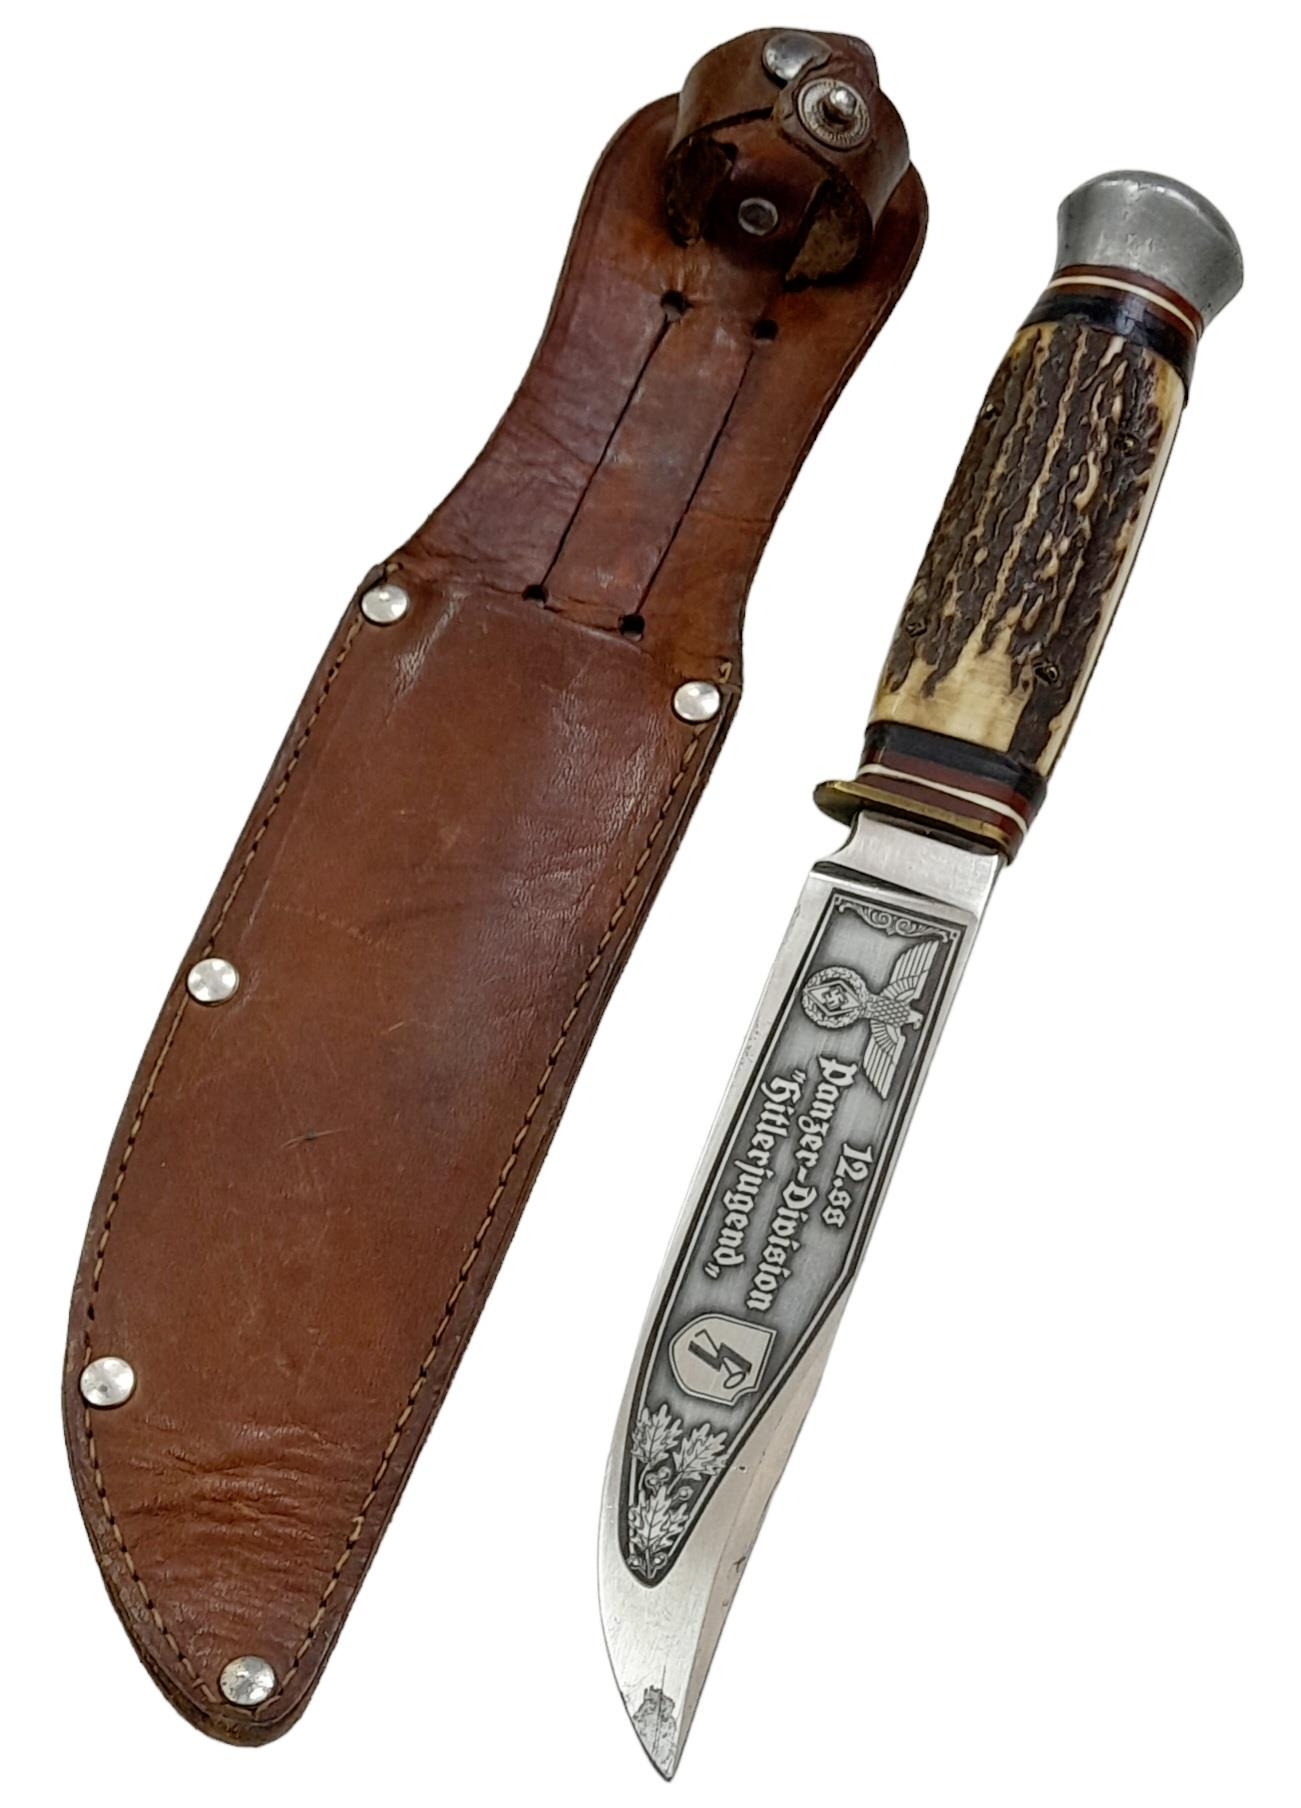 3rd Reich Hitler Youth Sheath Knife with acid etched blade dedicated to the 12th SS (Hitler Youth) - Image 3 of 5